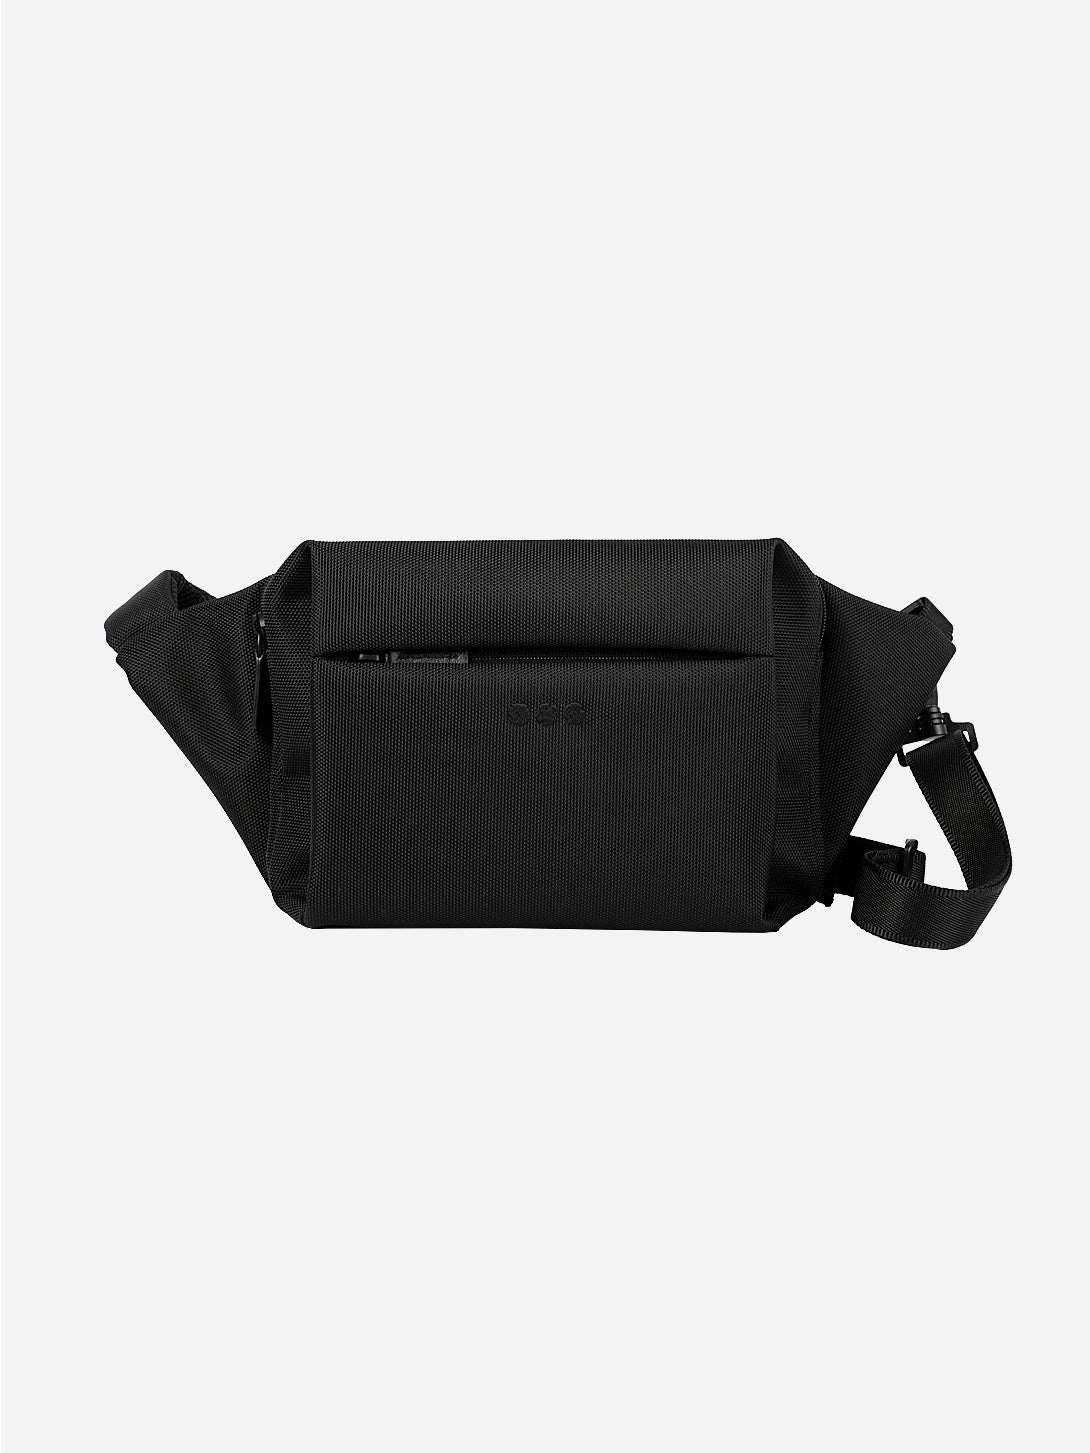 Black All-Things Sling ONS Clothing Accessory Bag